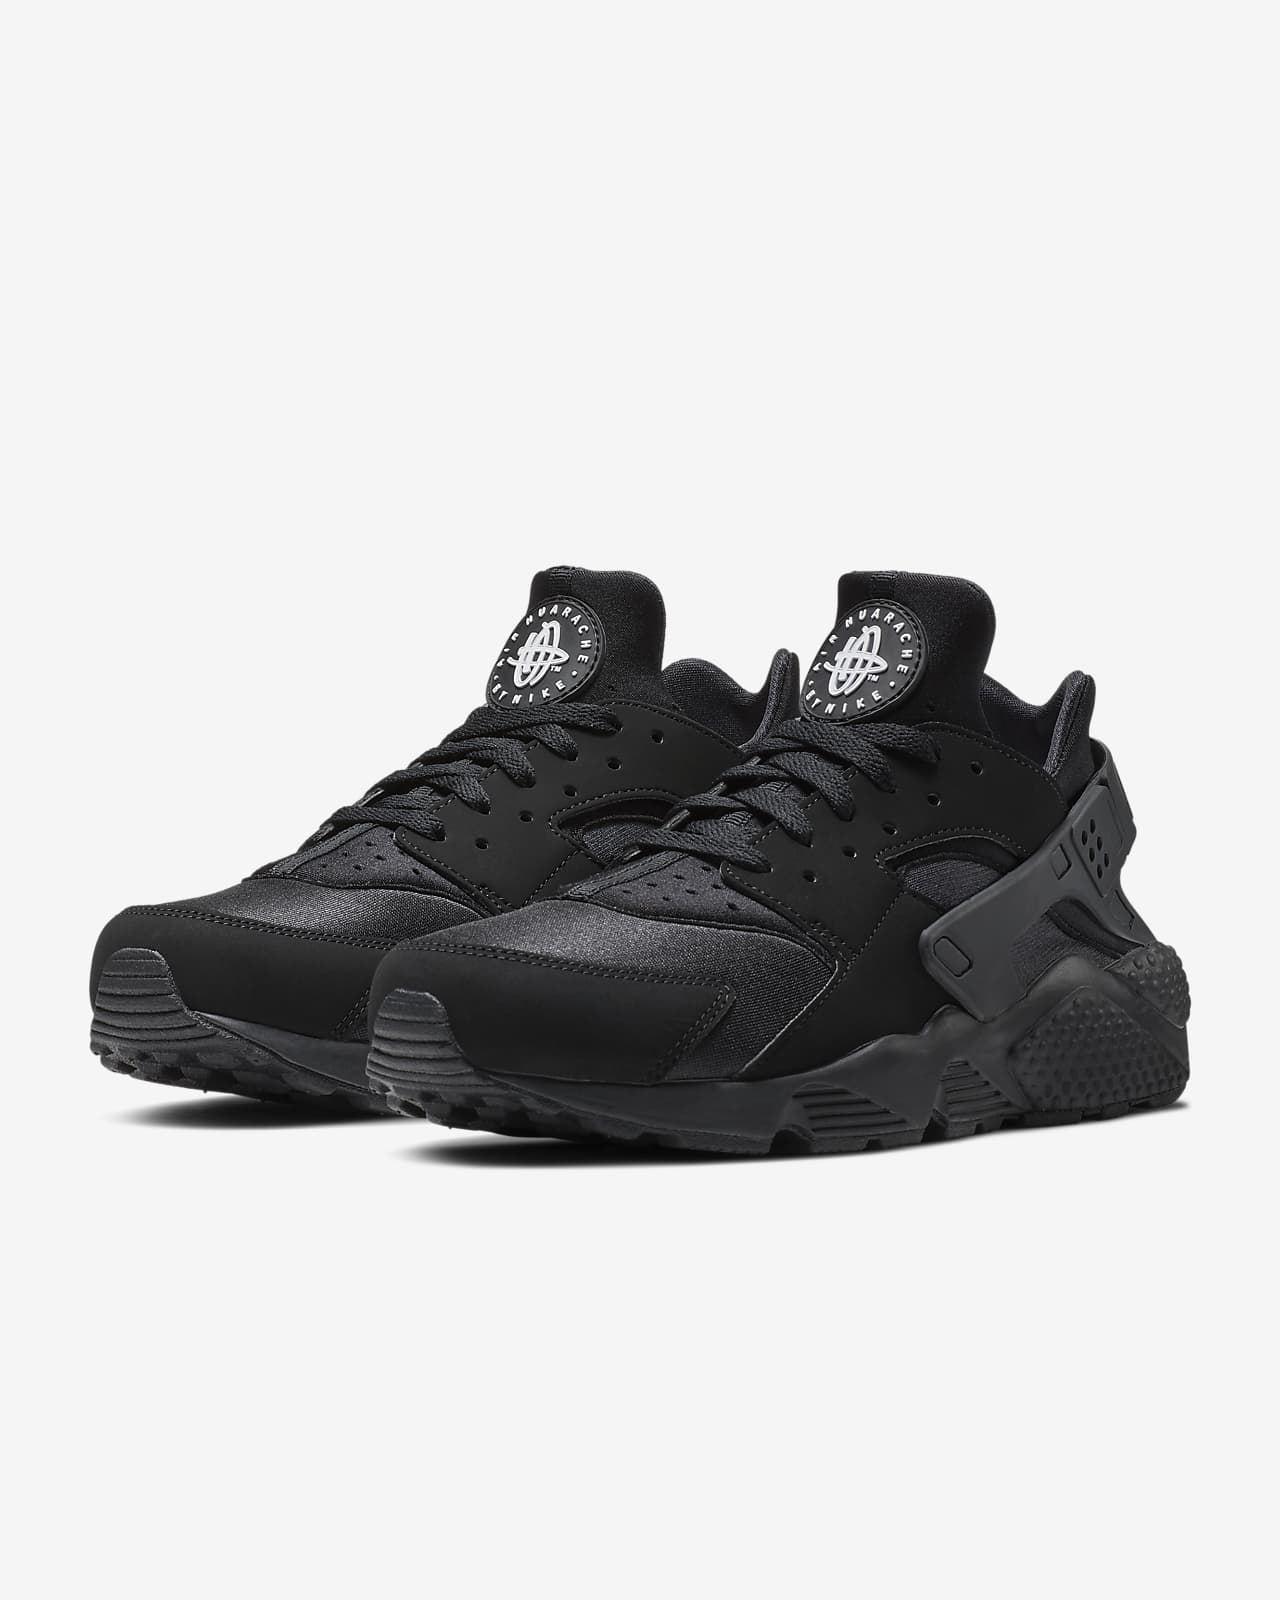 Nike Huarache Black And White Online Sale, UP TO 69% OFF